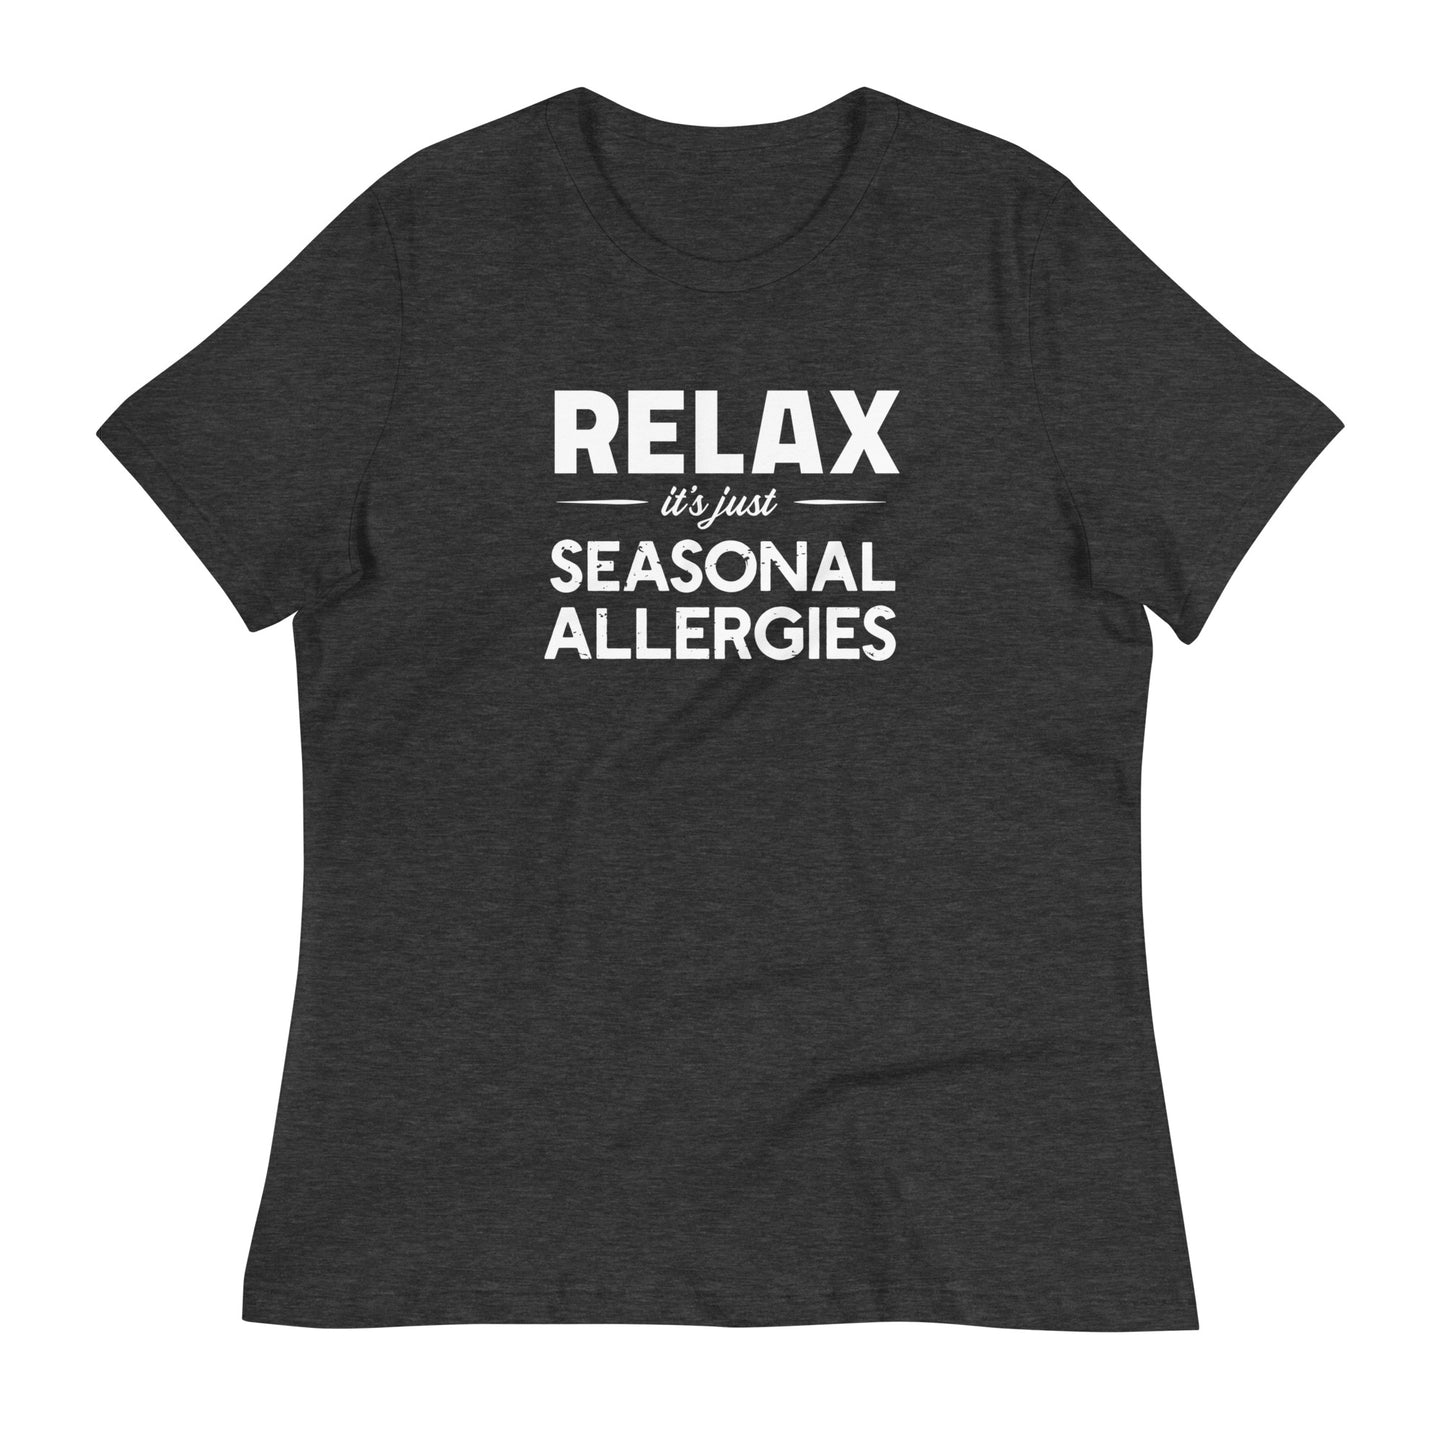 Dark Grey Heather women's relaxed fit t-shirt with white graphic: "RELAX it's just SEASONAL ALLERGIES"